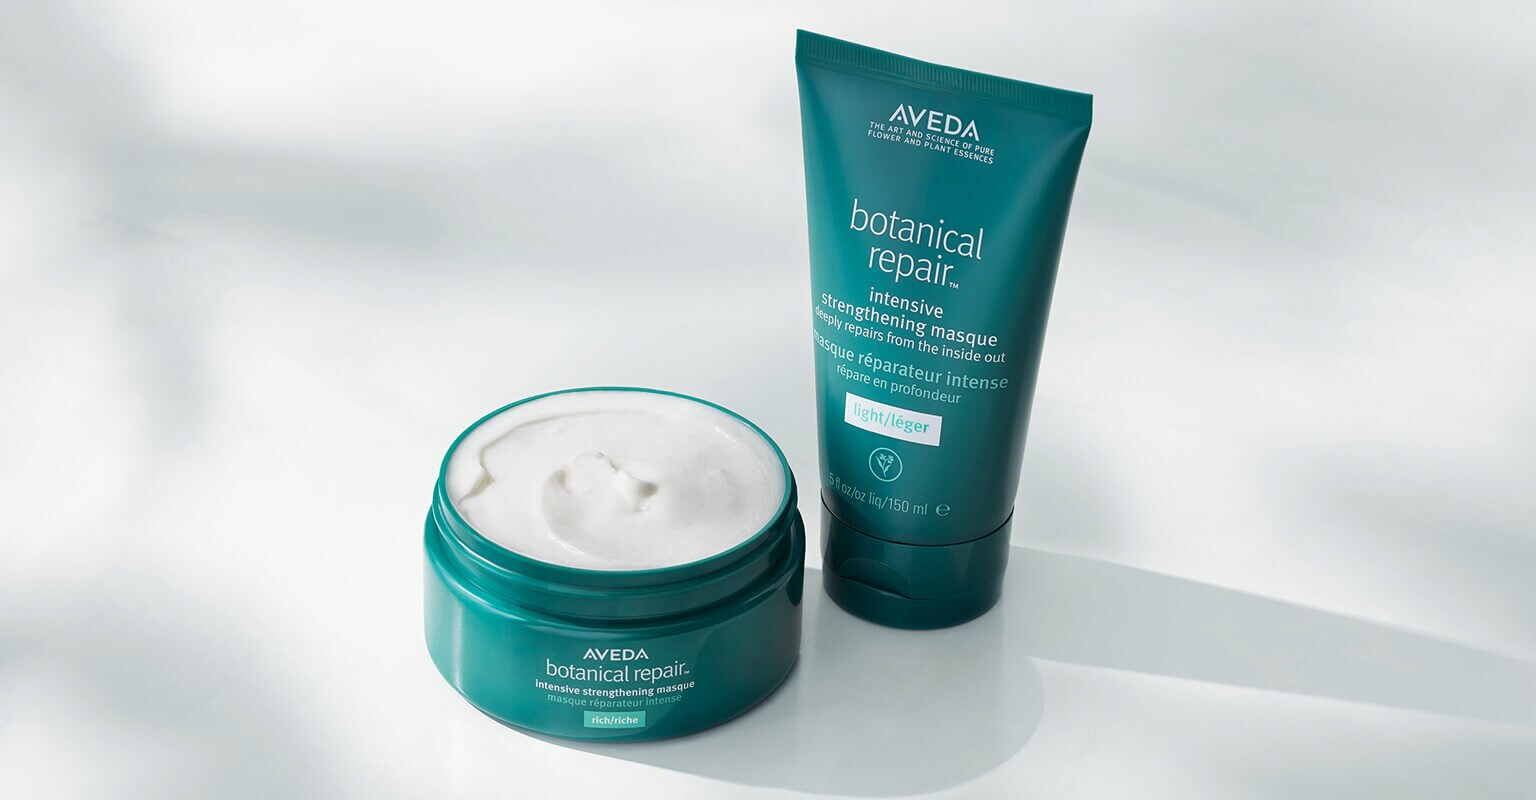 Masque your way to stronger hair with botanical repair intensive strengthening masques